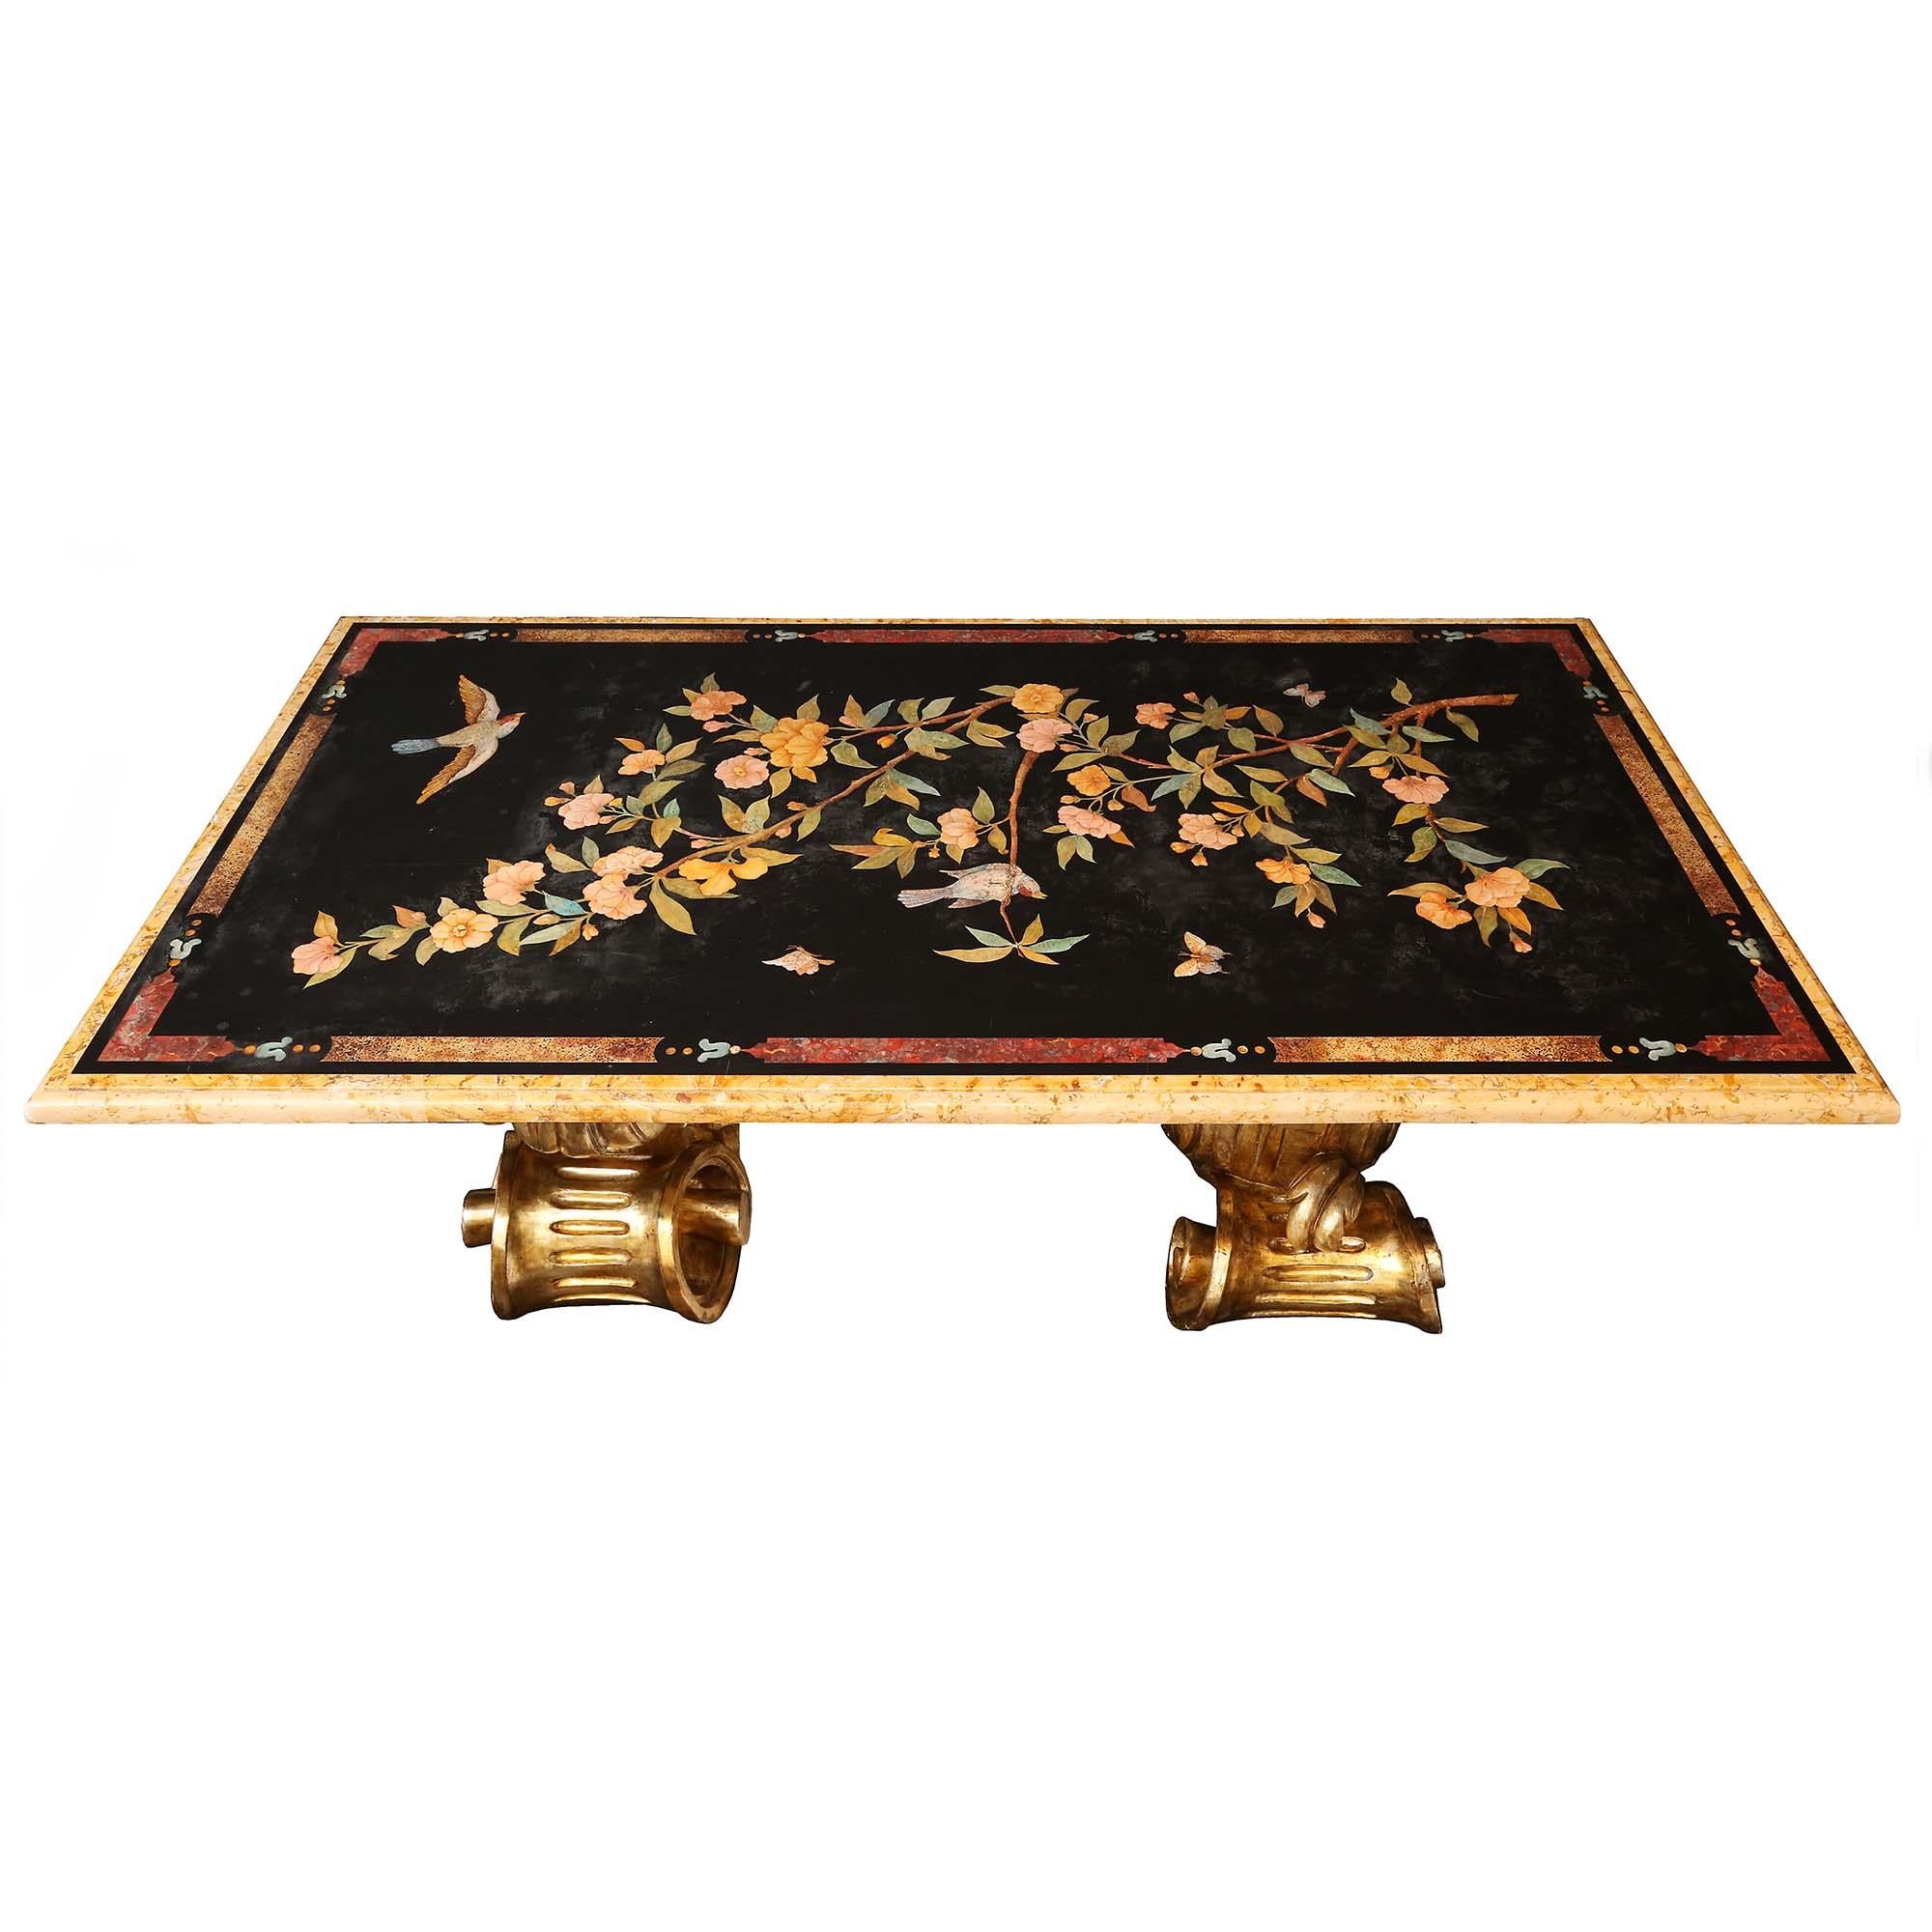 A stunning Italian 19th century scagliola and mecca dining/center table. The table is raised on opulently carved mecca scrolled Baroque supports with large acanthus leaves. The rectangular scagliola top has a black background decorated with foliate